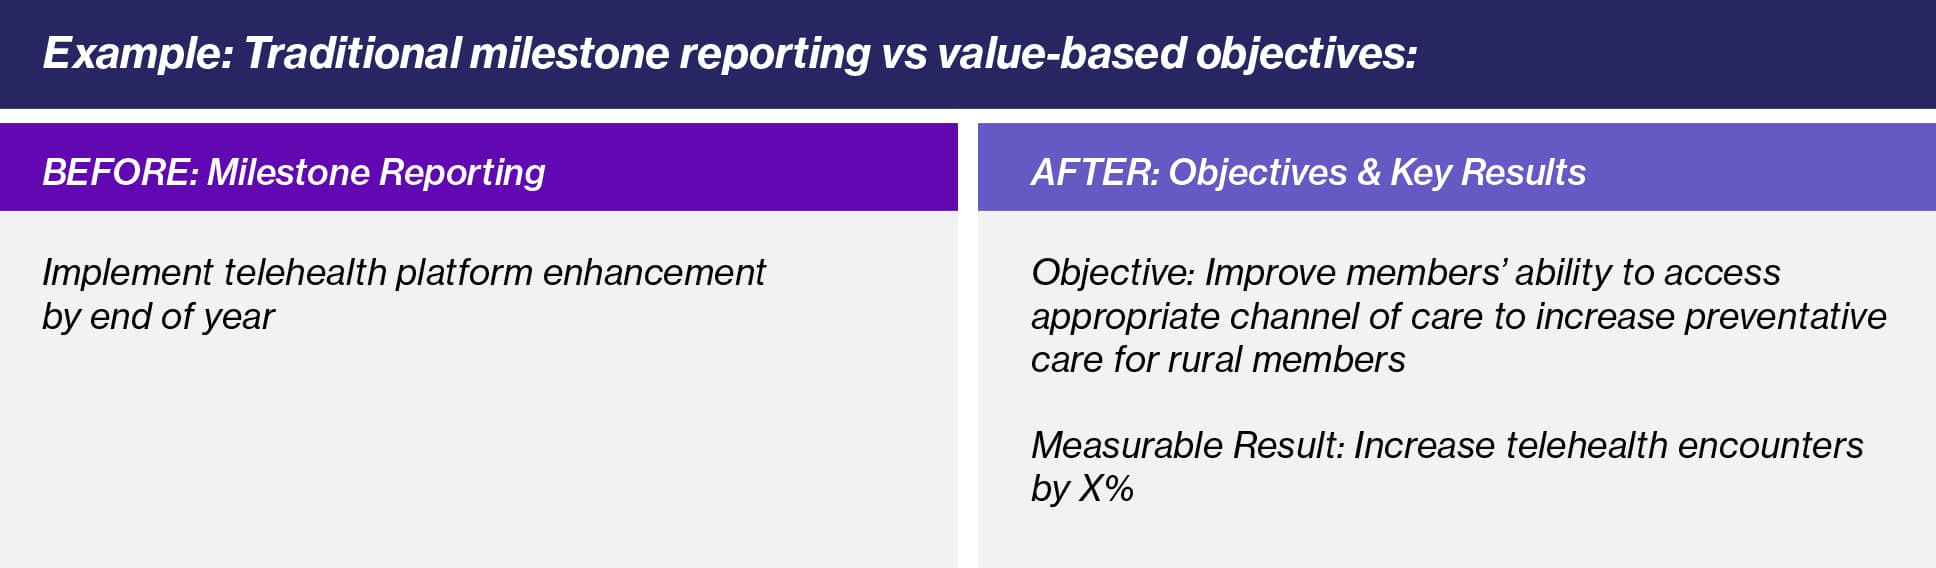 Traditional milestone reporting vs value-based objectives